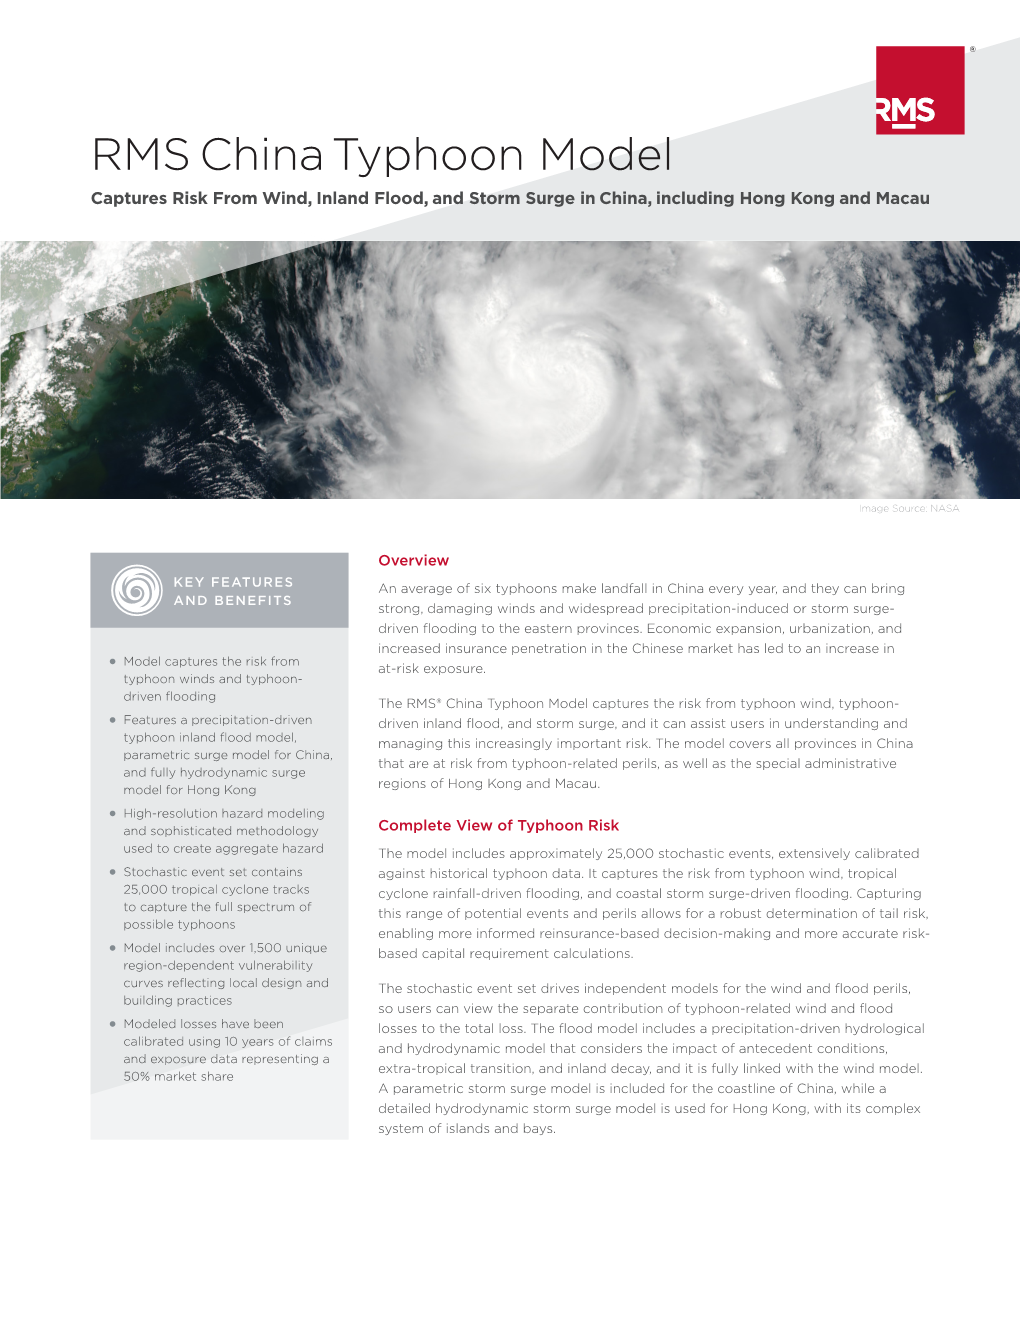 RMS China Typhoon Model Captures Risk from Wind, Inland Flood, and Storm Surge in China, Including Hong Kong and Macau